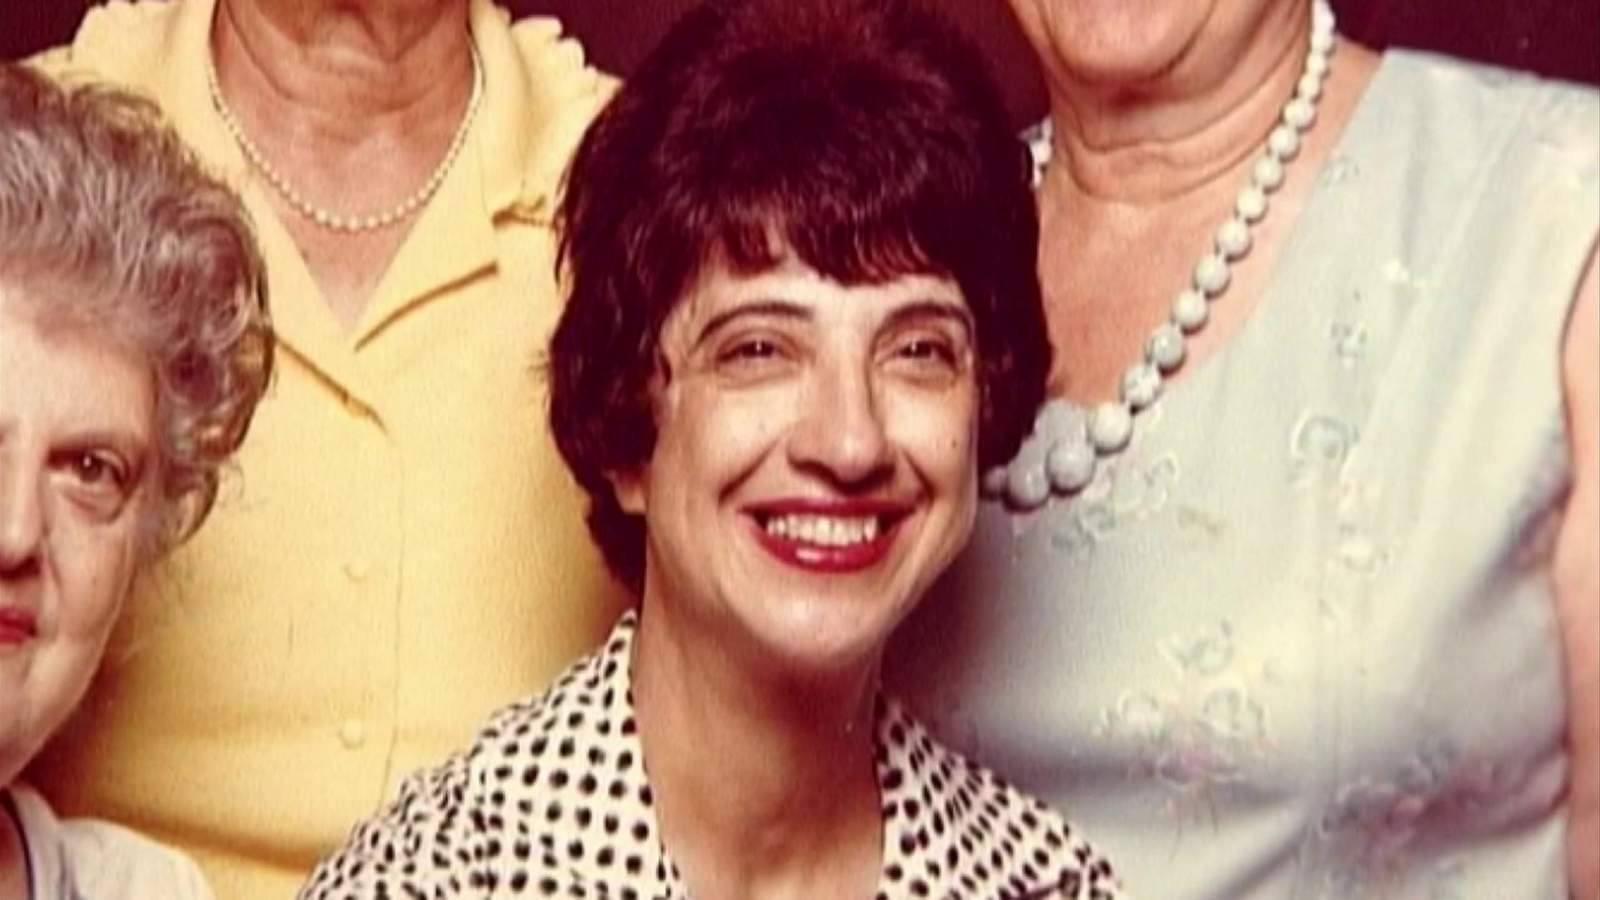 Social media pushes for answers in decades old Covington cold case murder